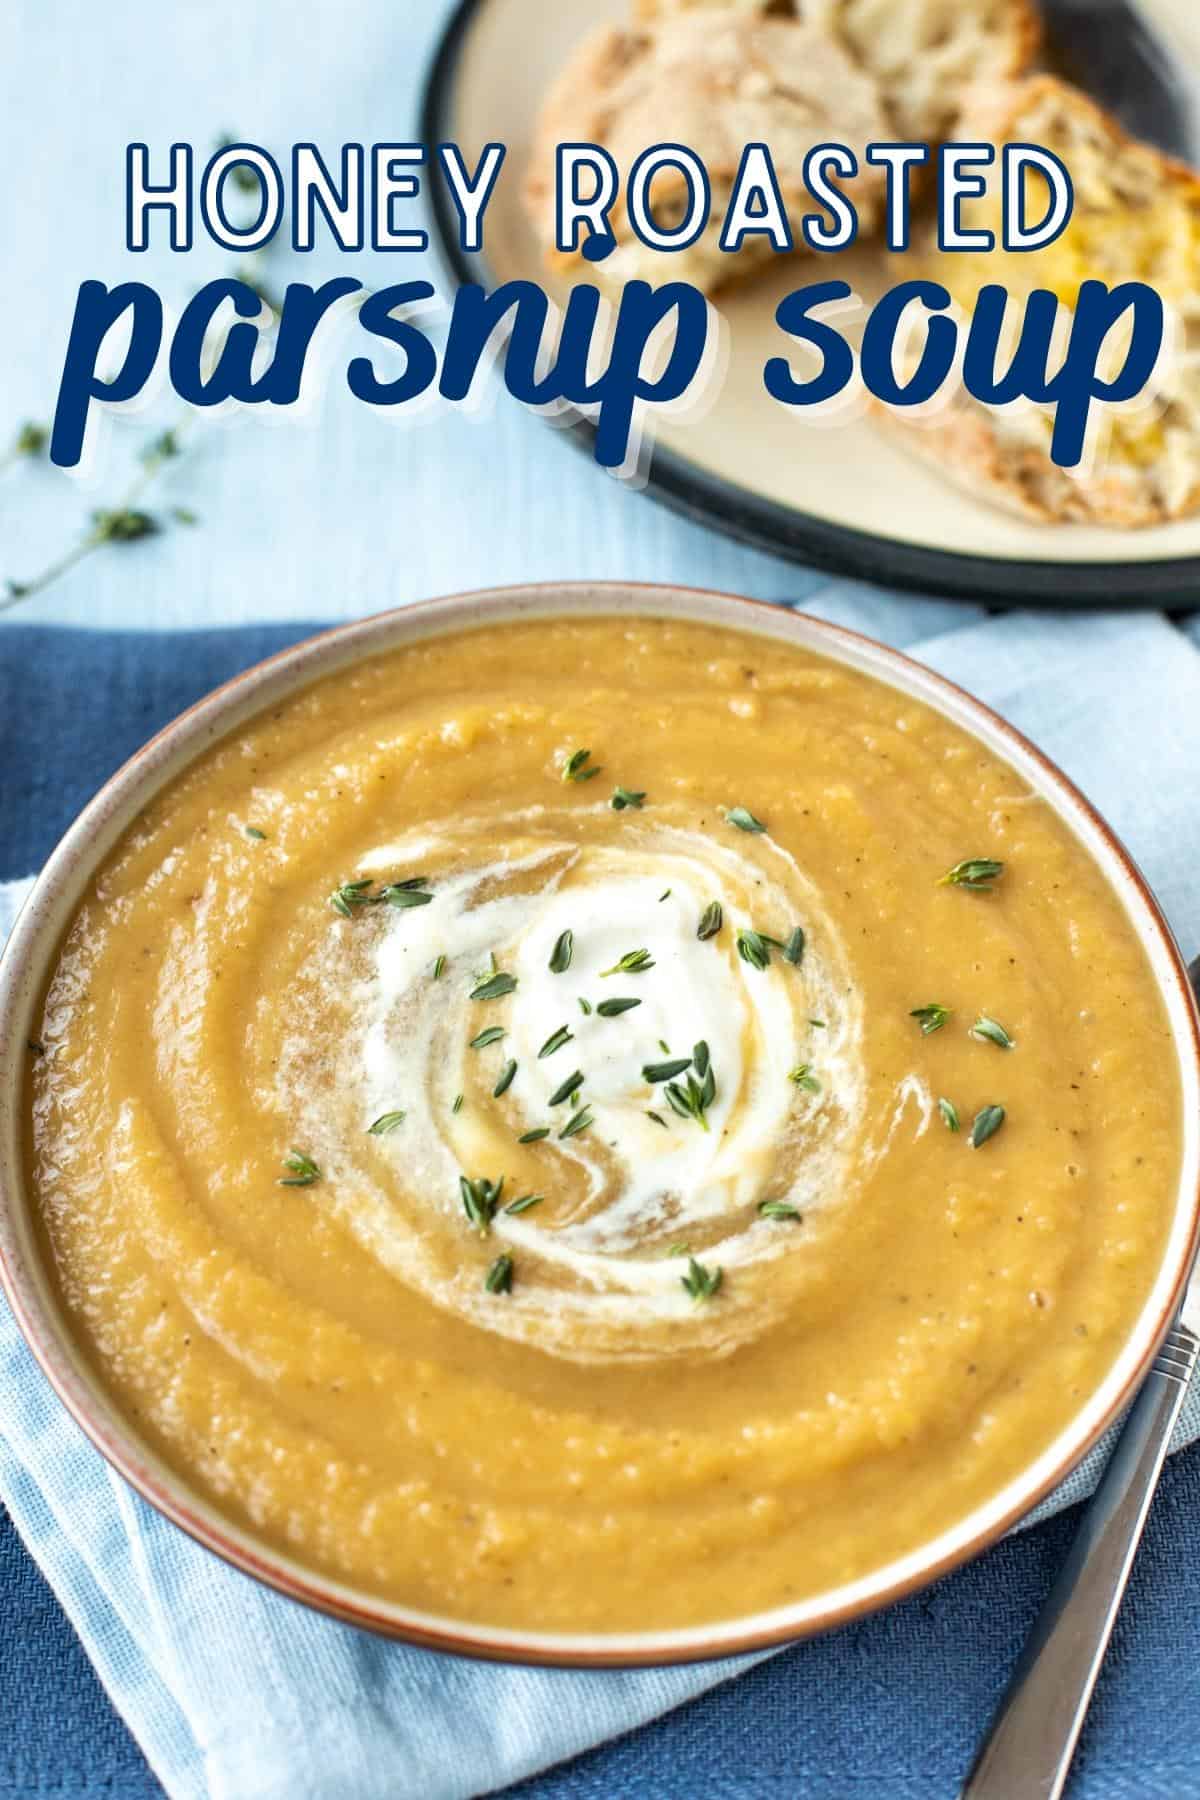 A bowl of creamy parsnip soup topped with a swirl of cream and fresh thyme.